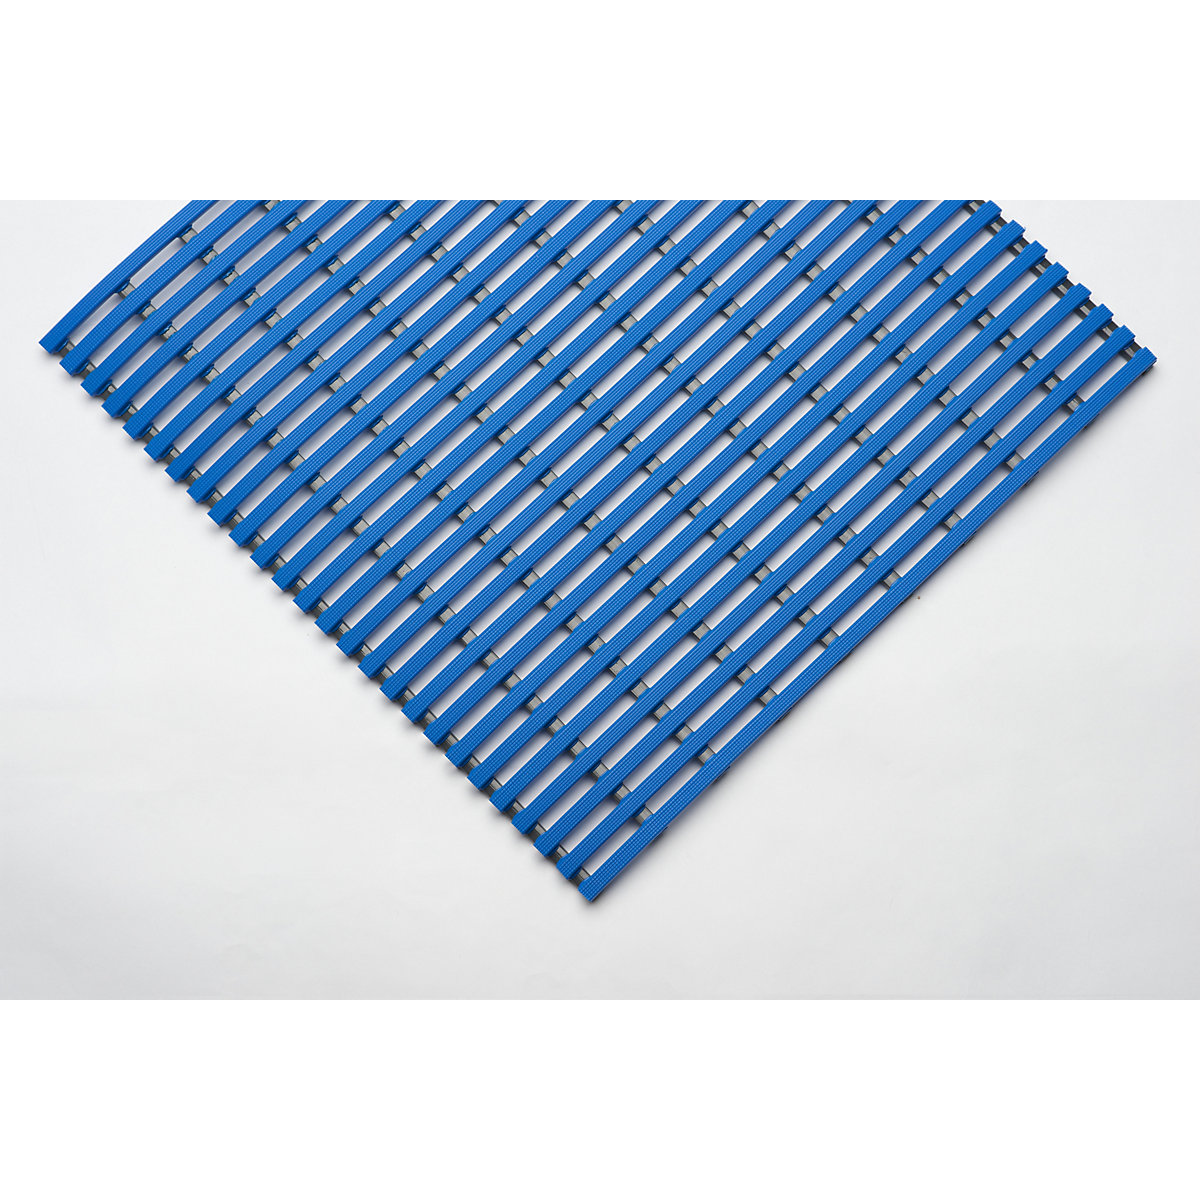 Floor mat for showers and changing rooms (Product illustration 2)-1